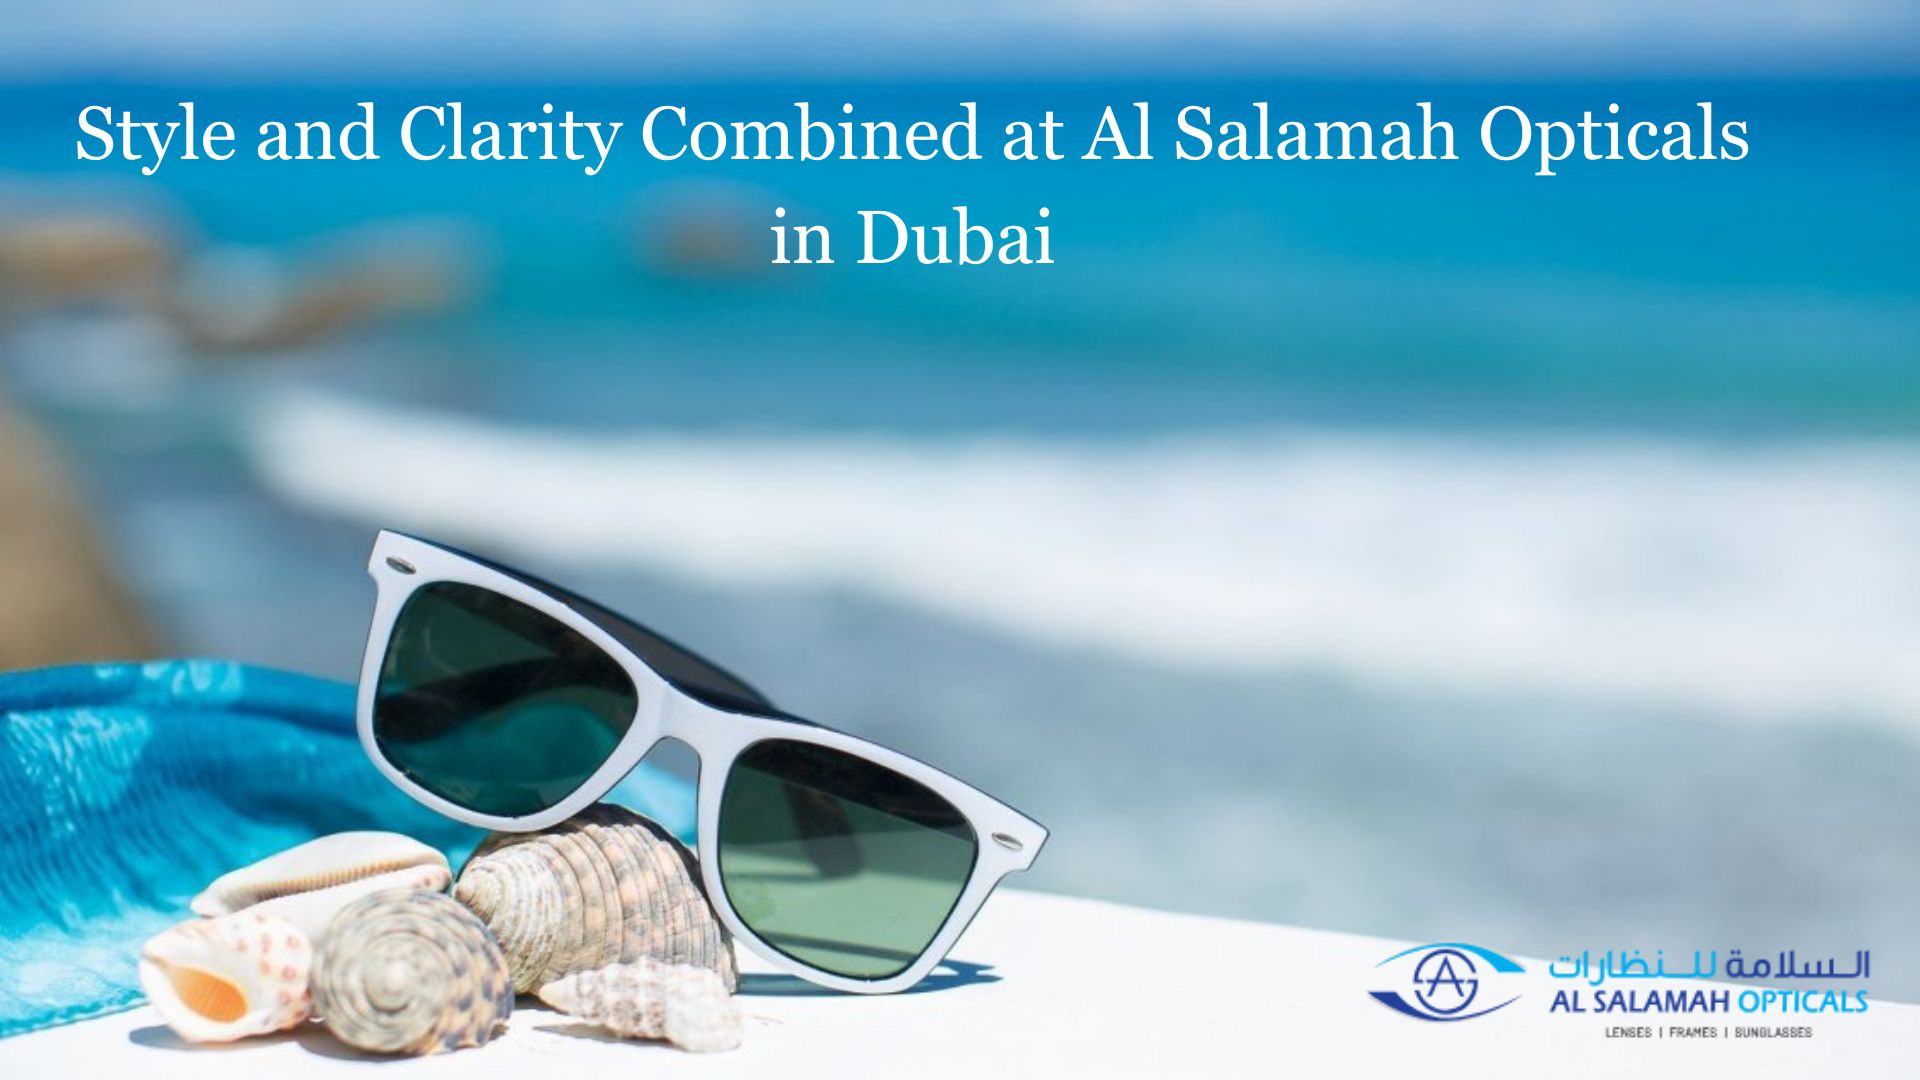 Style and Clarity Combined at Al Salamah Opticals in Dubai